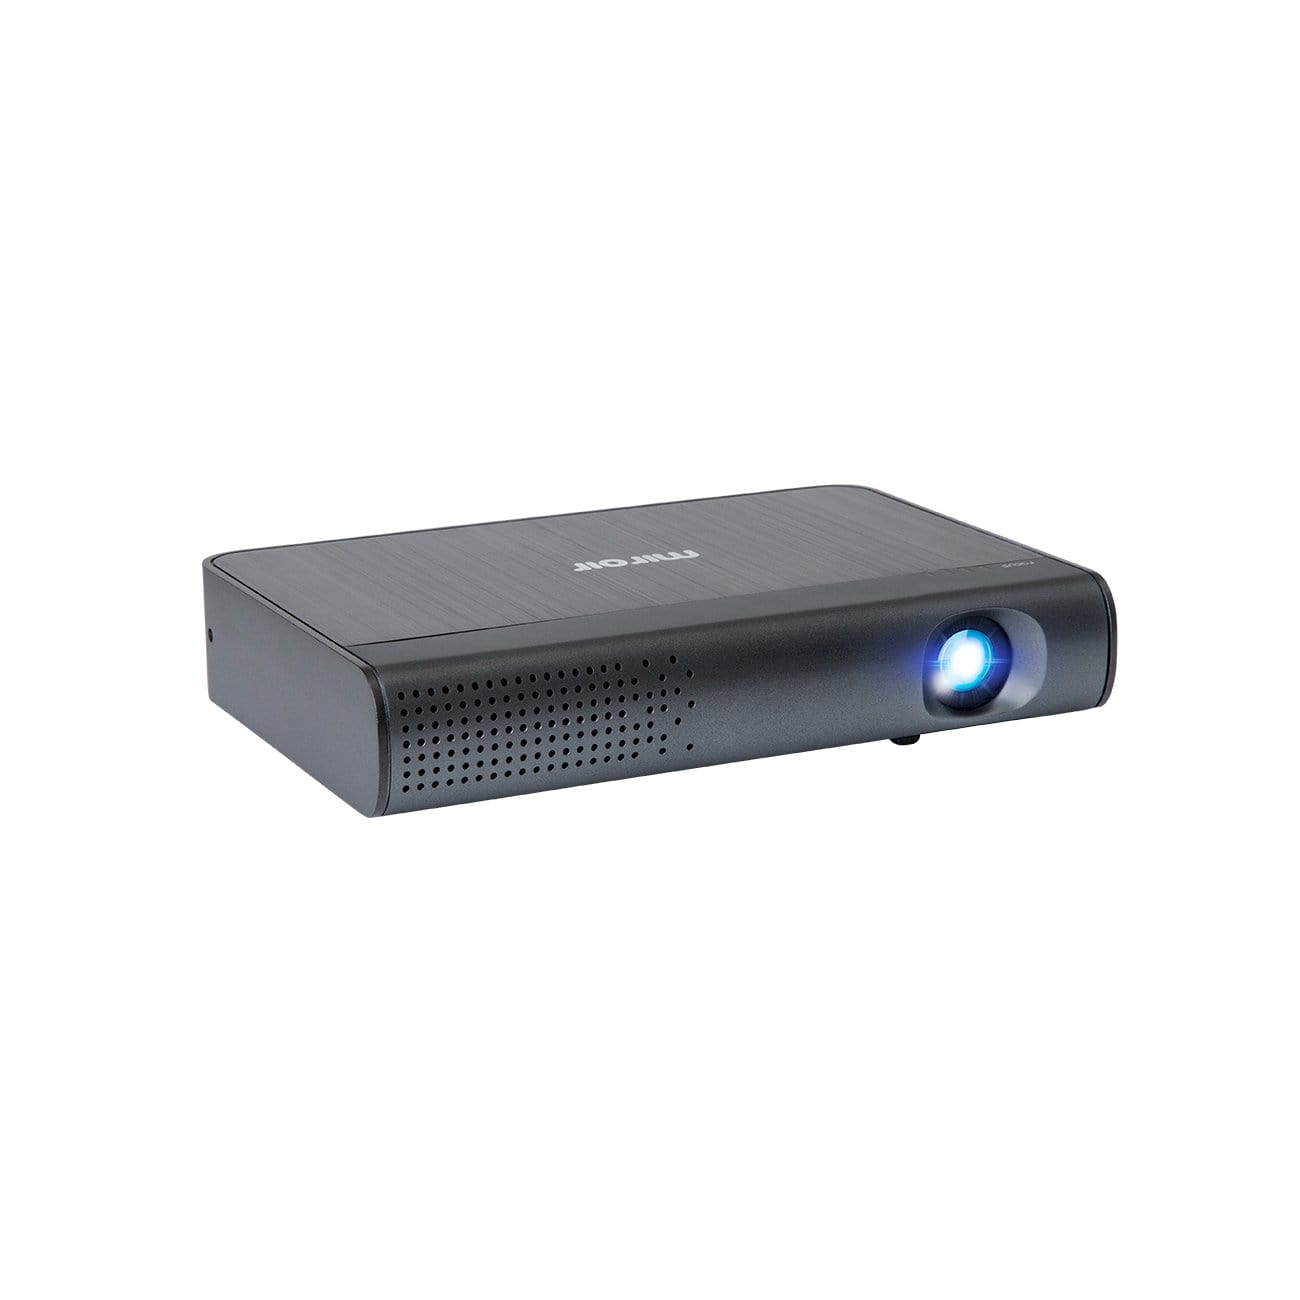 Miroir M289 1080p Mini Projector, Full HD Native Resolution, Battery-powered, USB Type C Charge and Video